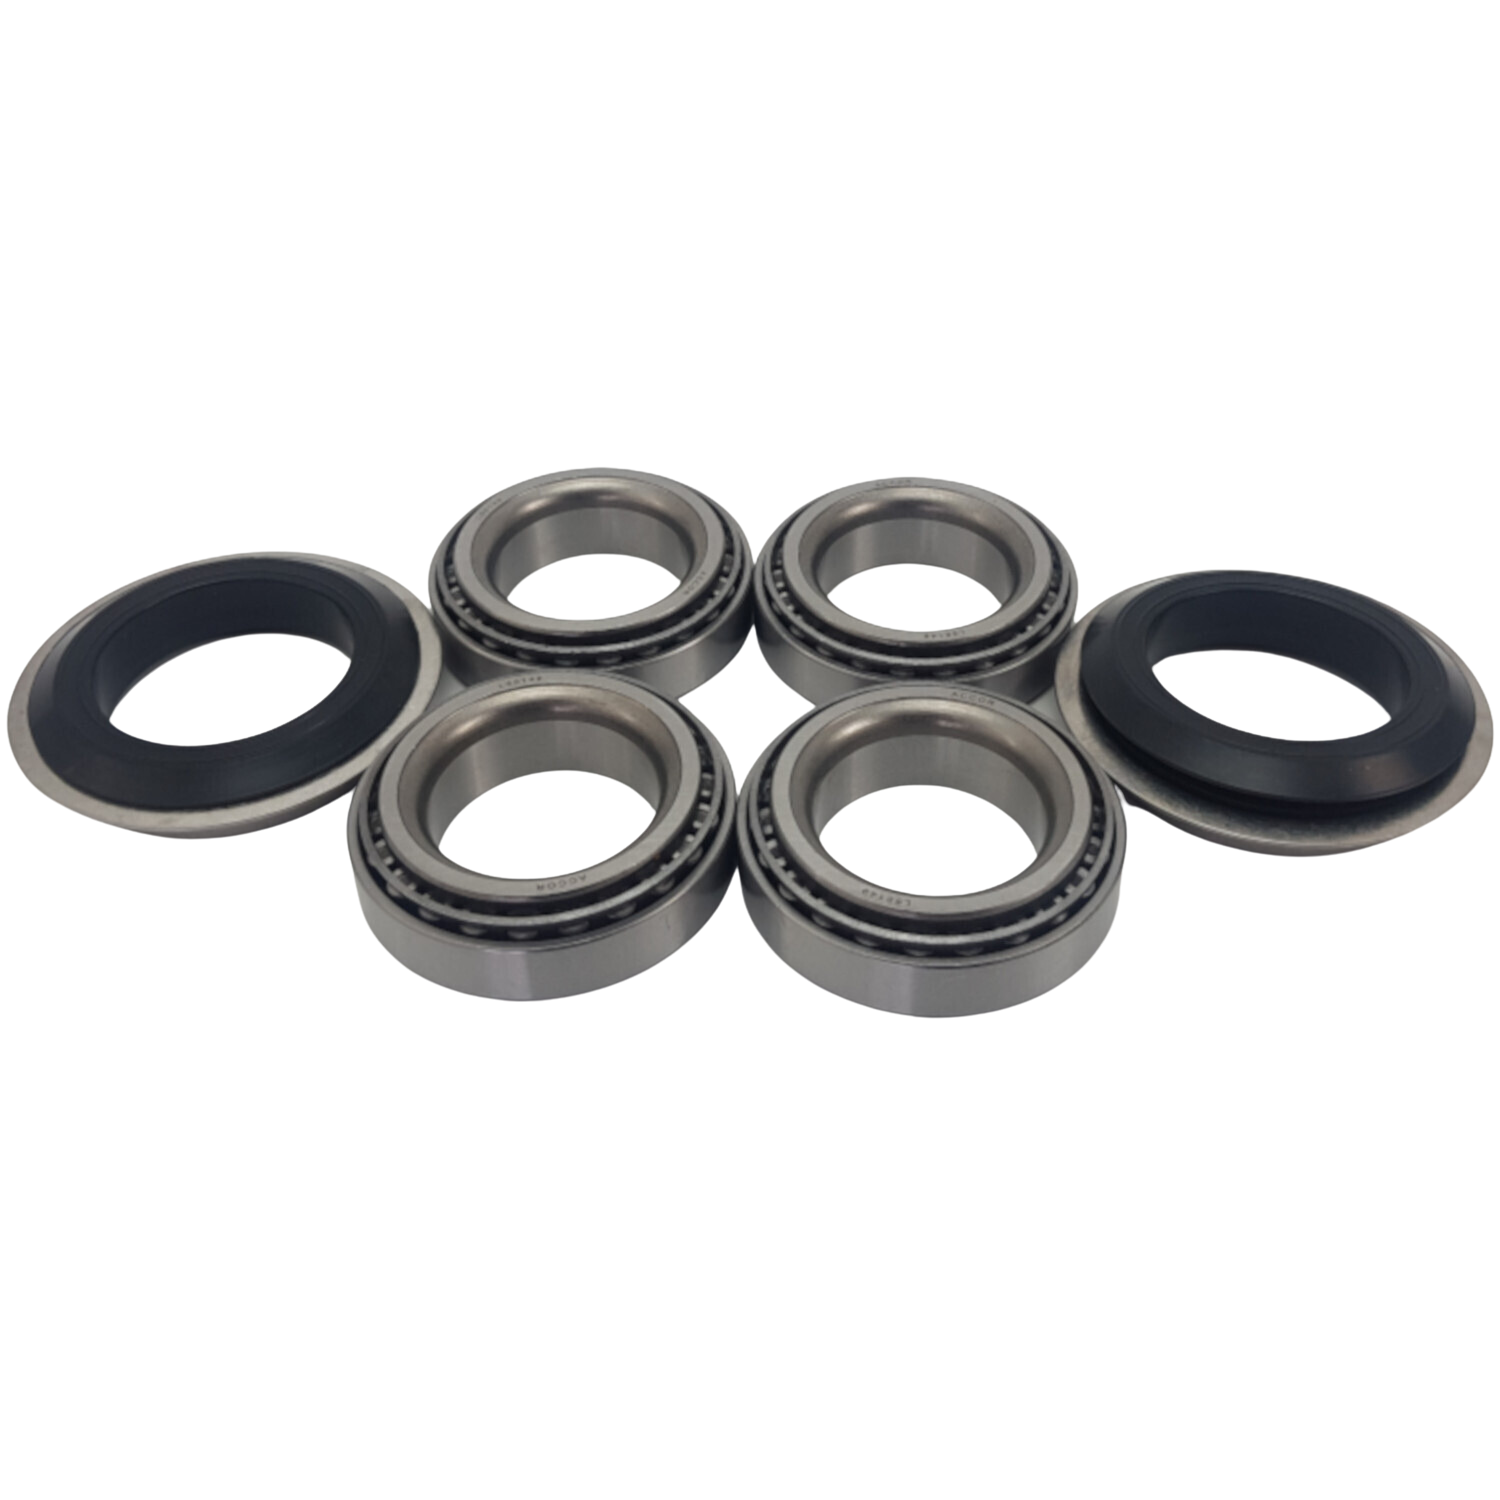 2x2 Tonne Bearing Kit for Kimberley Campers w/ disc brake LM67048/10 25580/20